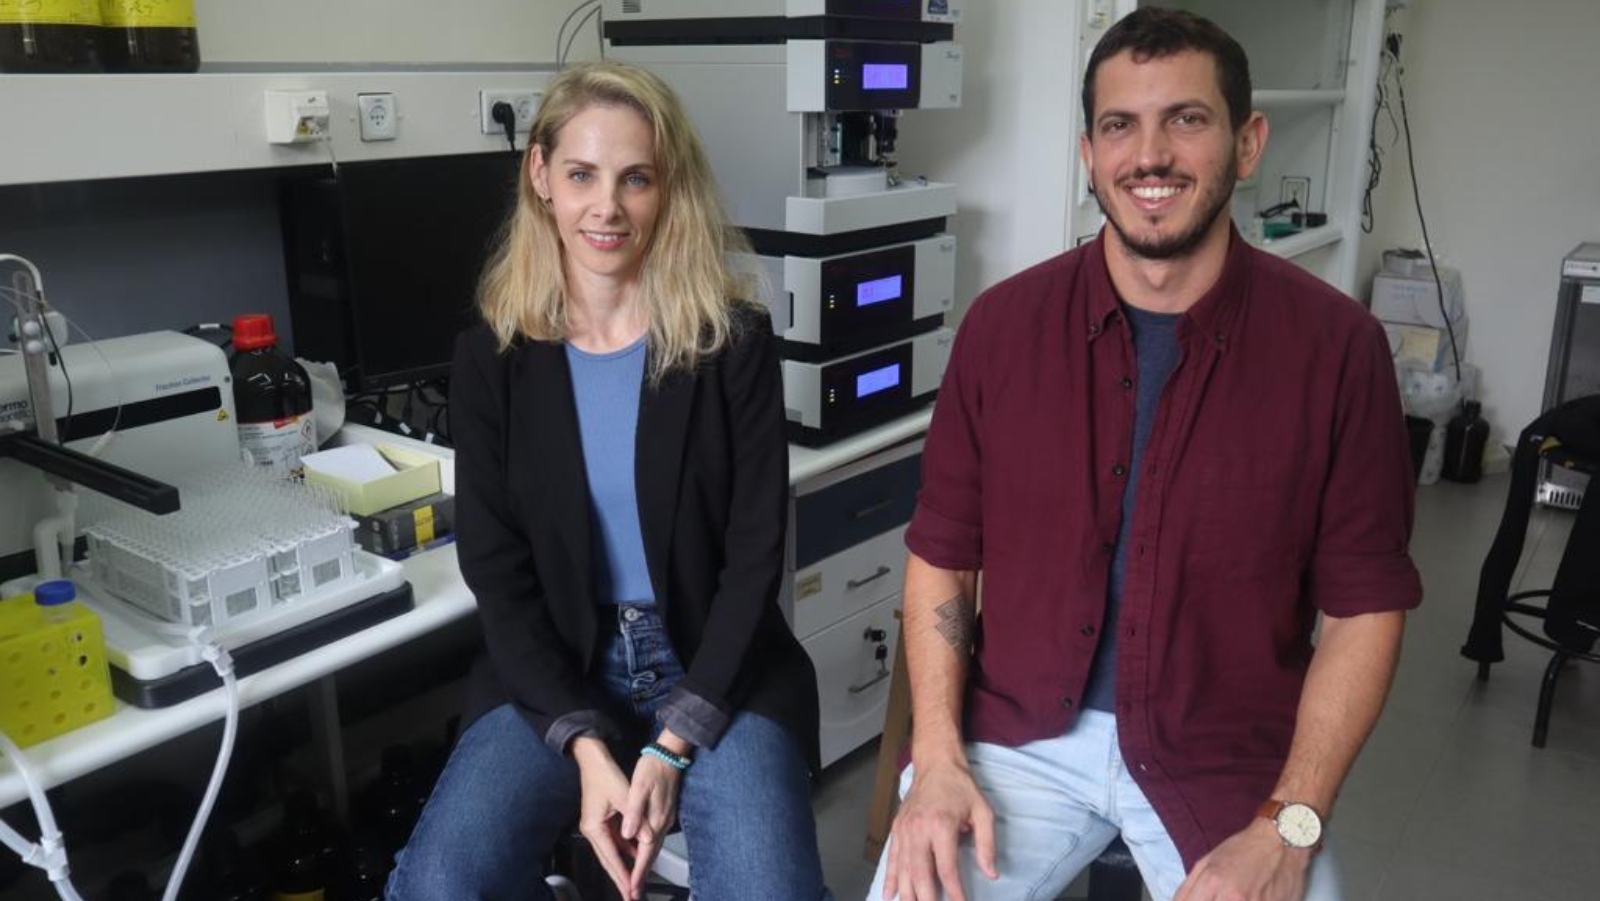 Dr. Ayala Lampel and PhD student Itai Katzir, who led the research on technology that will allow controlled encapsulation and release of molecules by exposure to UV light. Photo courtesy of Tel Aviv University